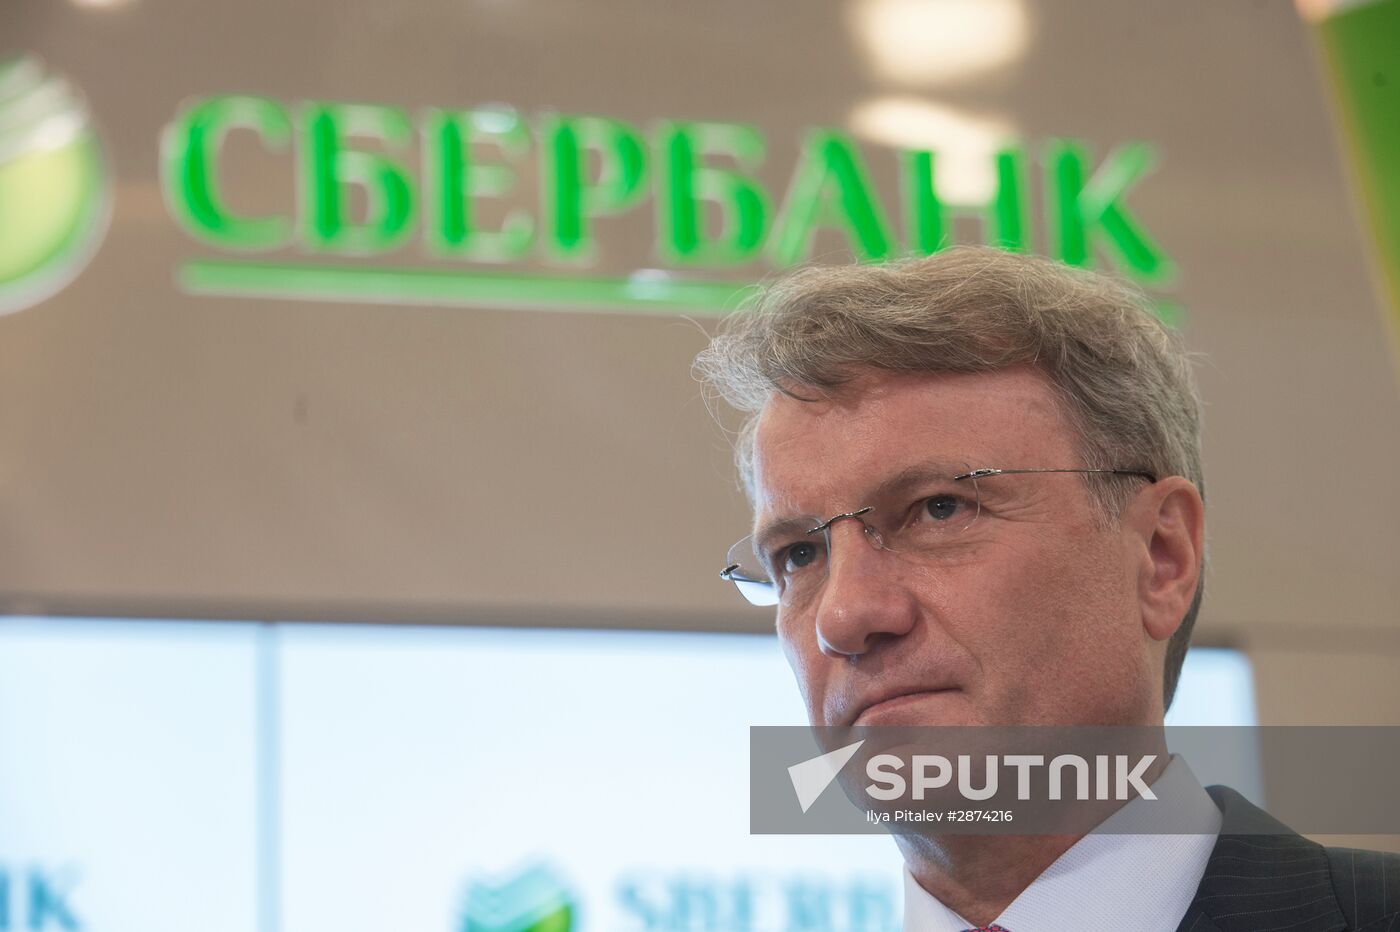 Sberbank signs several agreements during SPIEF 2016